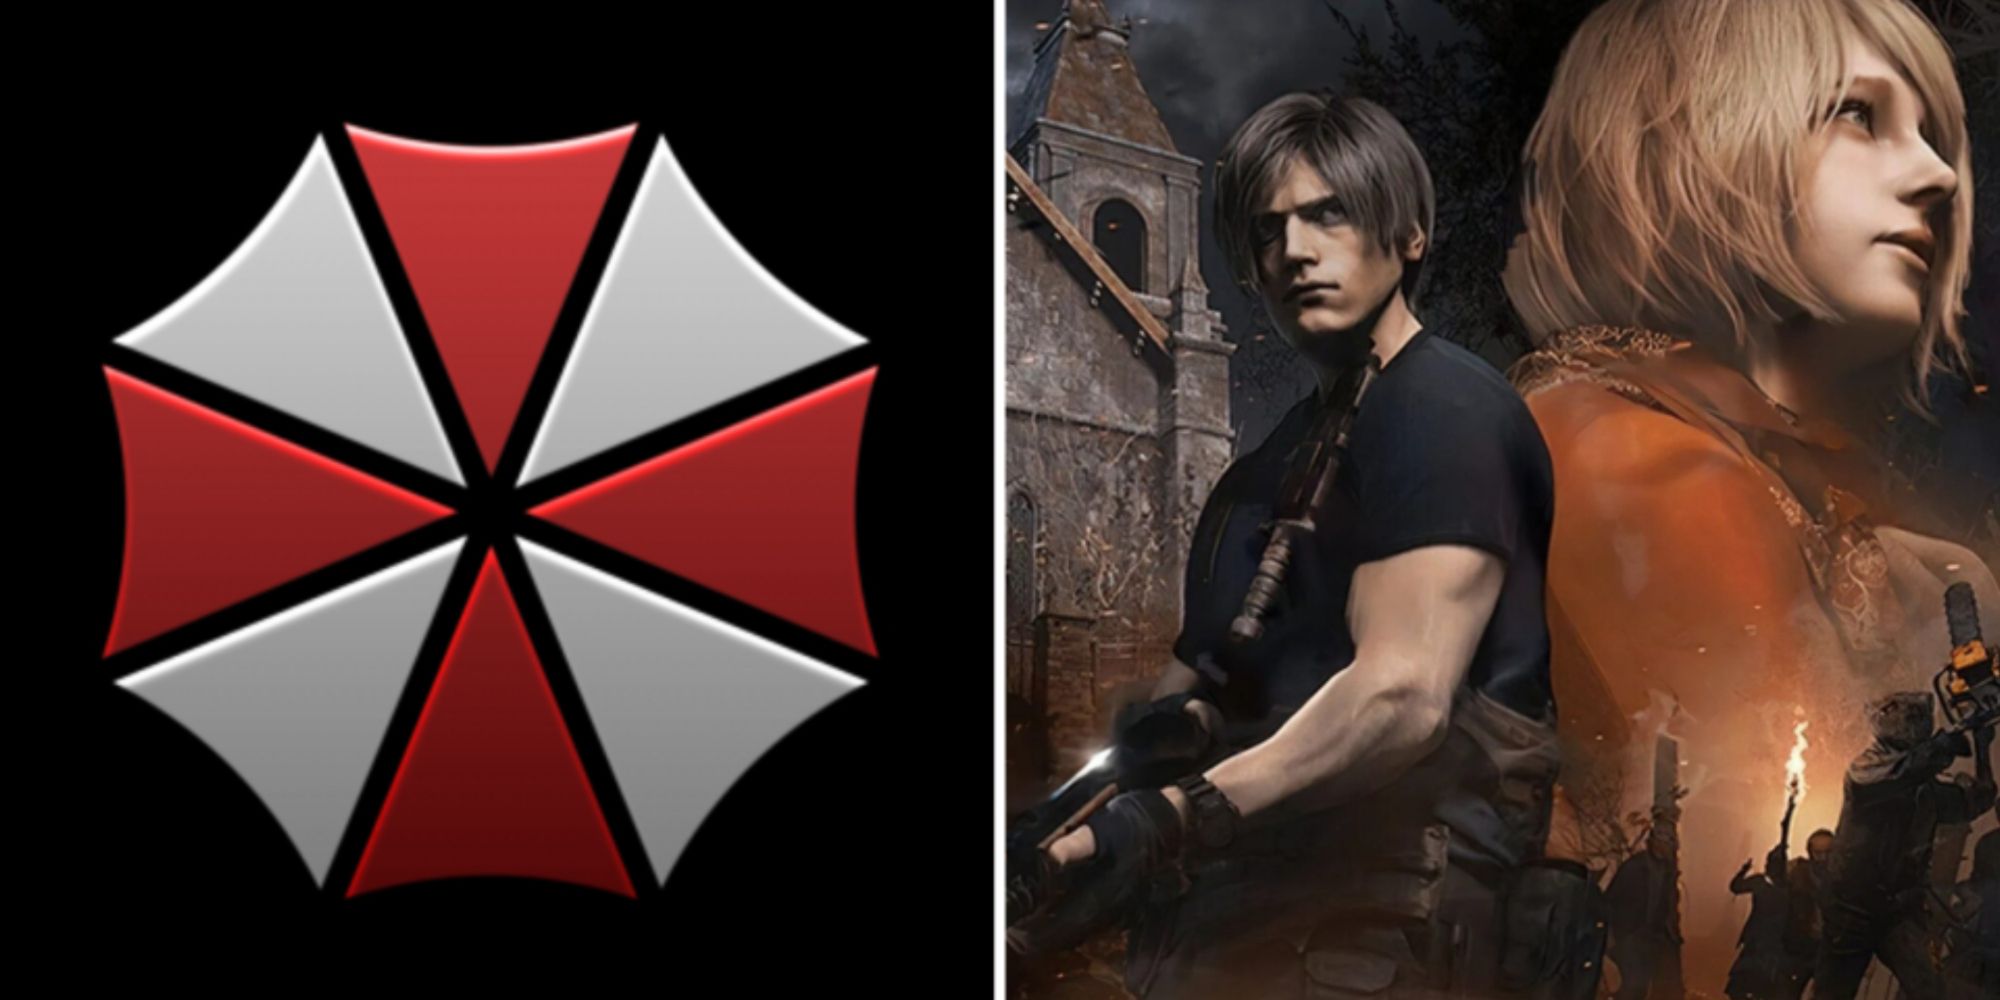 A collage showing the Umbrella logo on the left and official art work of RE4 Remake on the right.